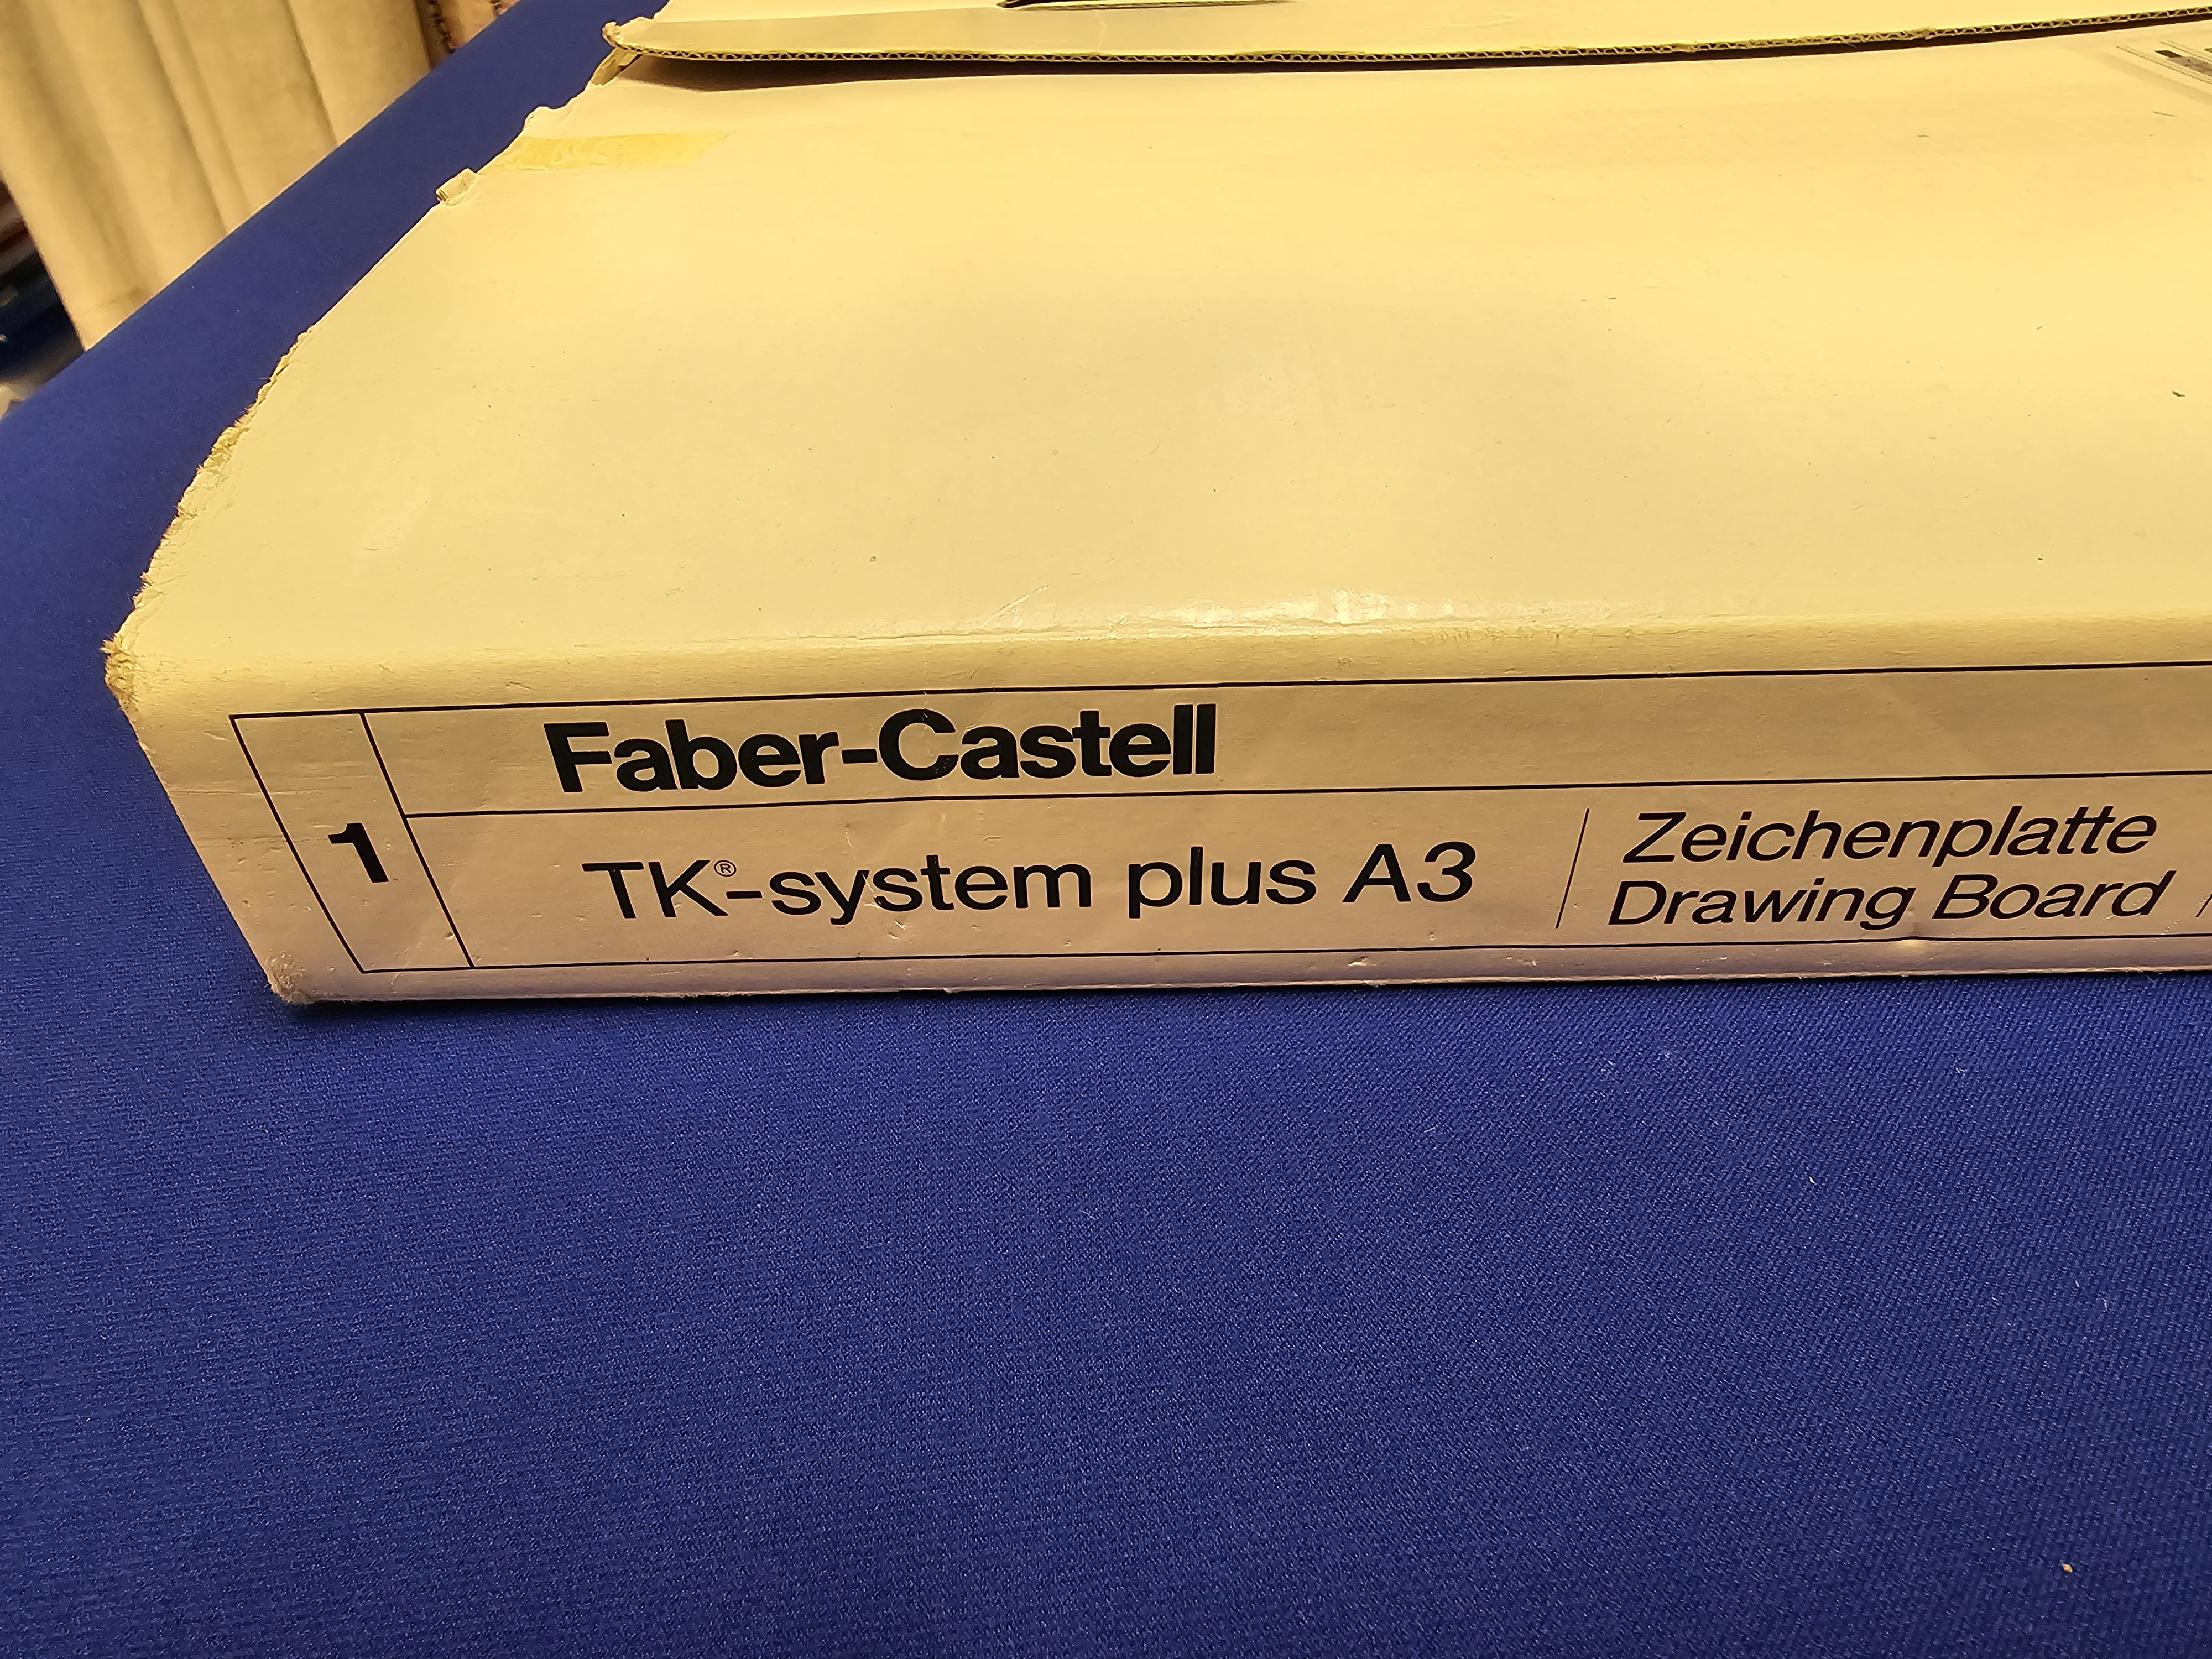 Faber-Castell TK-system plus A3 Technical drawing board + Extras - Bild 3 aus 16